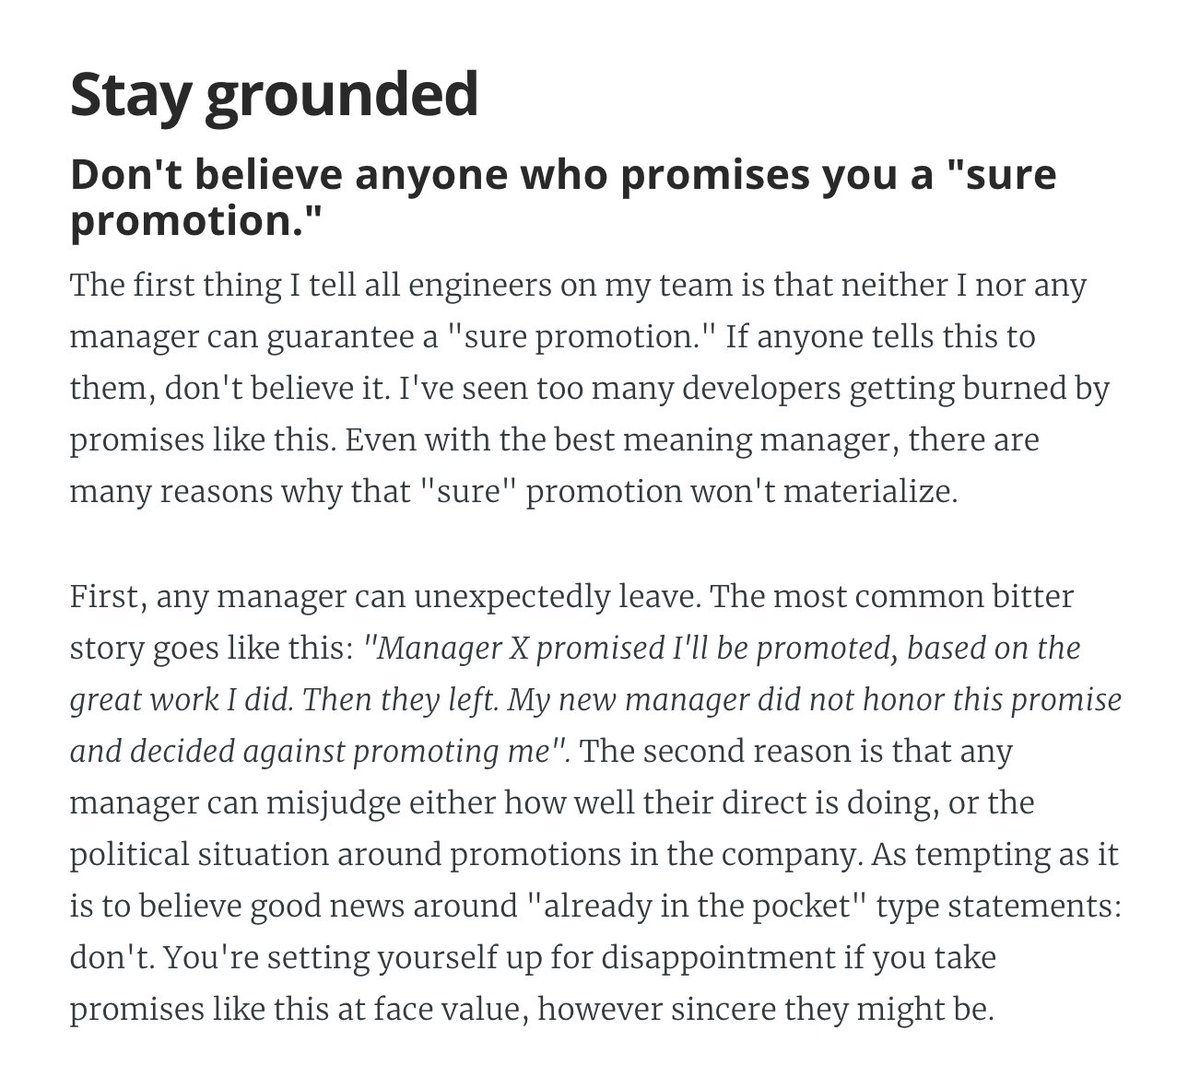 6. Don't "blindly chase" the promotion, alienating others. Stay grounded, but put in the work.7. Don't have promotion be your only goal. Aim for professional growth, over chasing titles.I wrote all this down in an article, with resources & templates:  https://blog.pragmaticengineer.com/software-engineering-promotions/